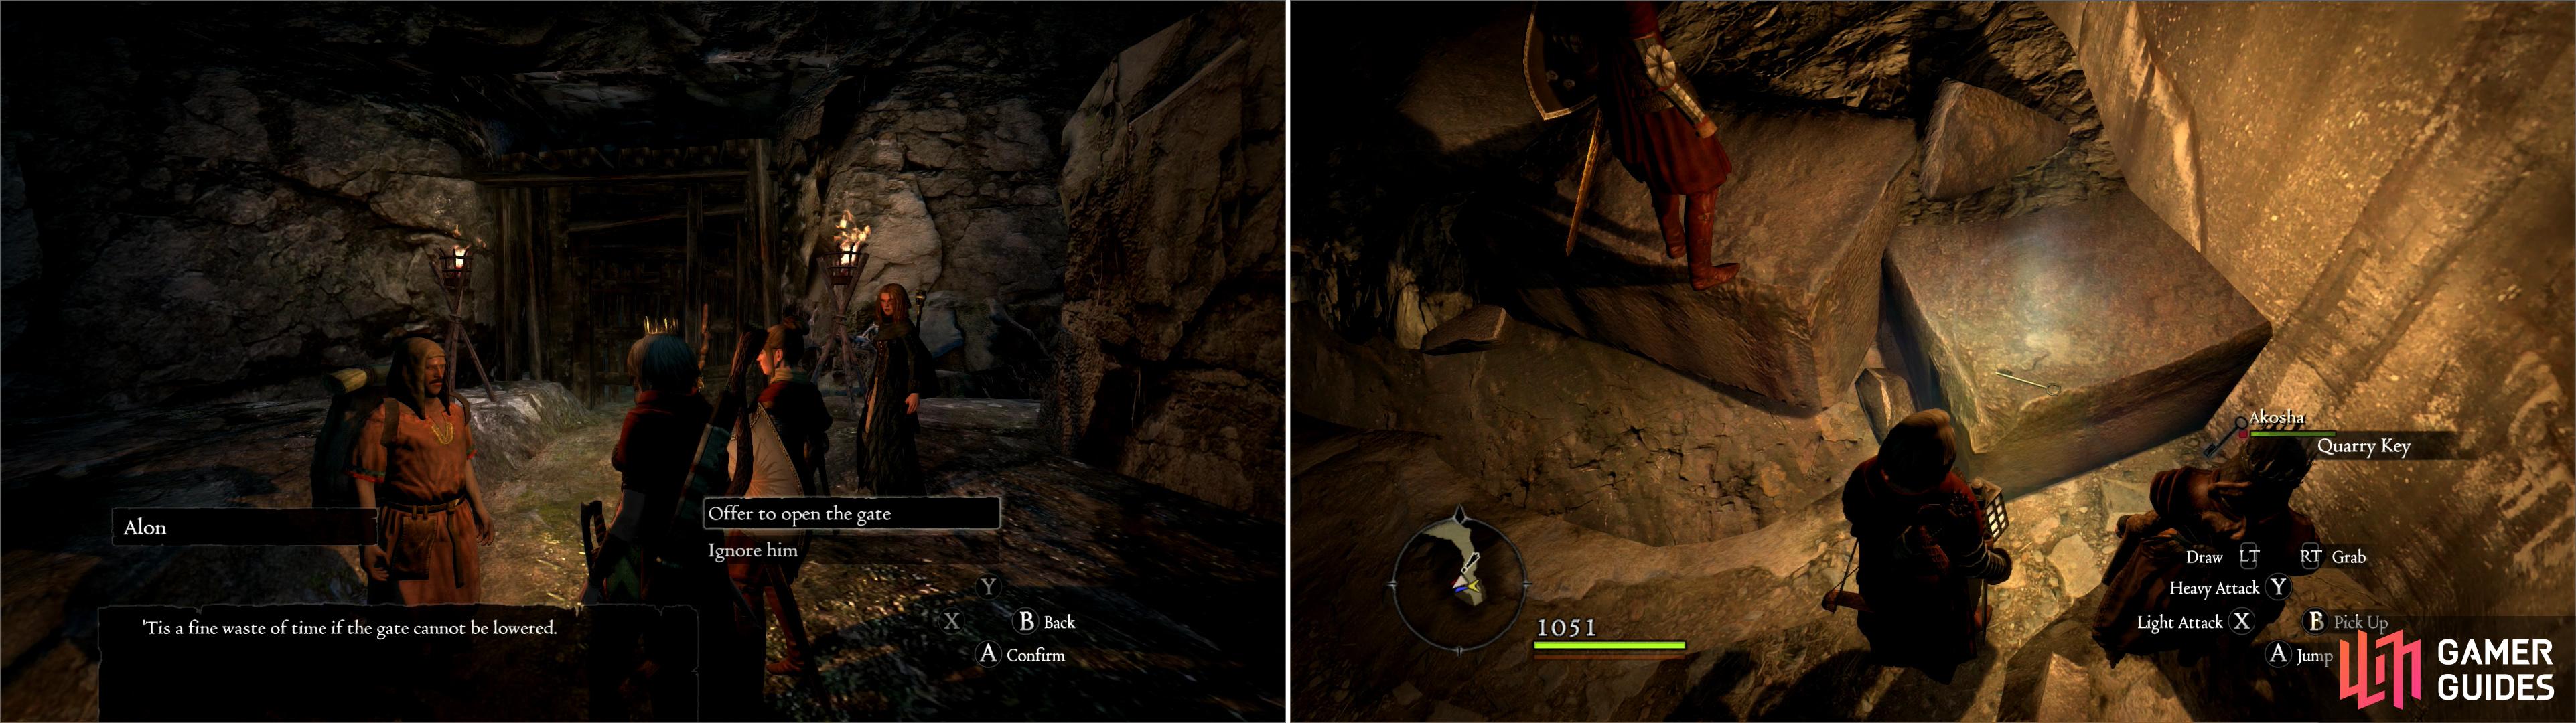 Find Alon outside of the Ancient Quarry and agree to help him clear the way (left). Shortly inside the quarry you’ll find the Quarry Key, which opens up some side-passages (right).